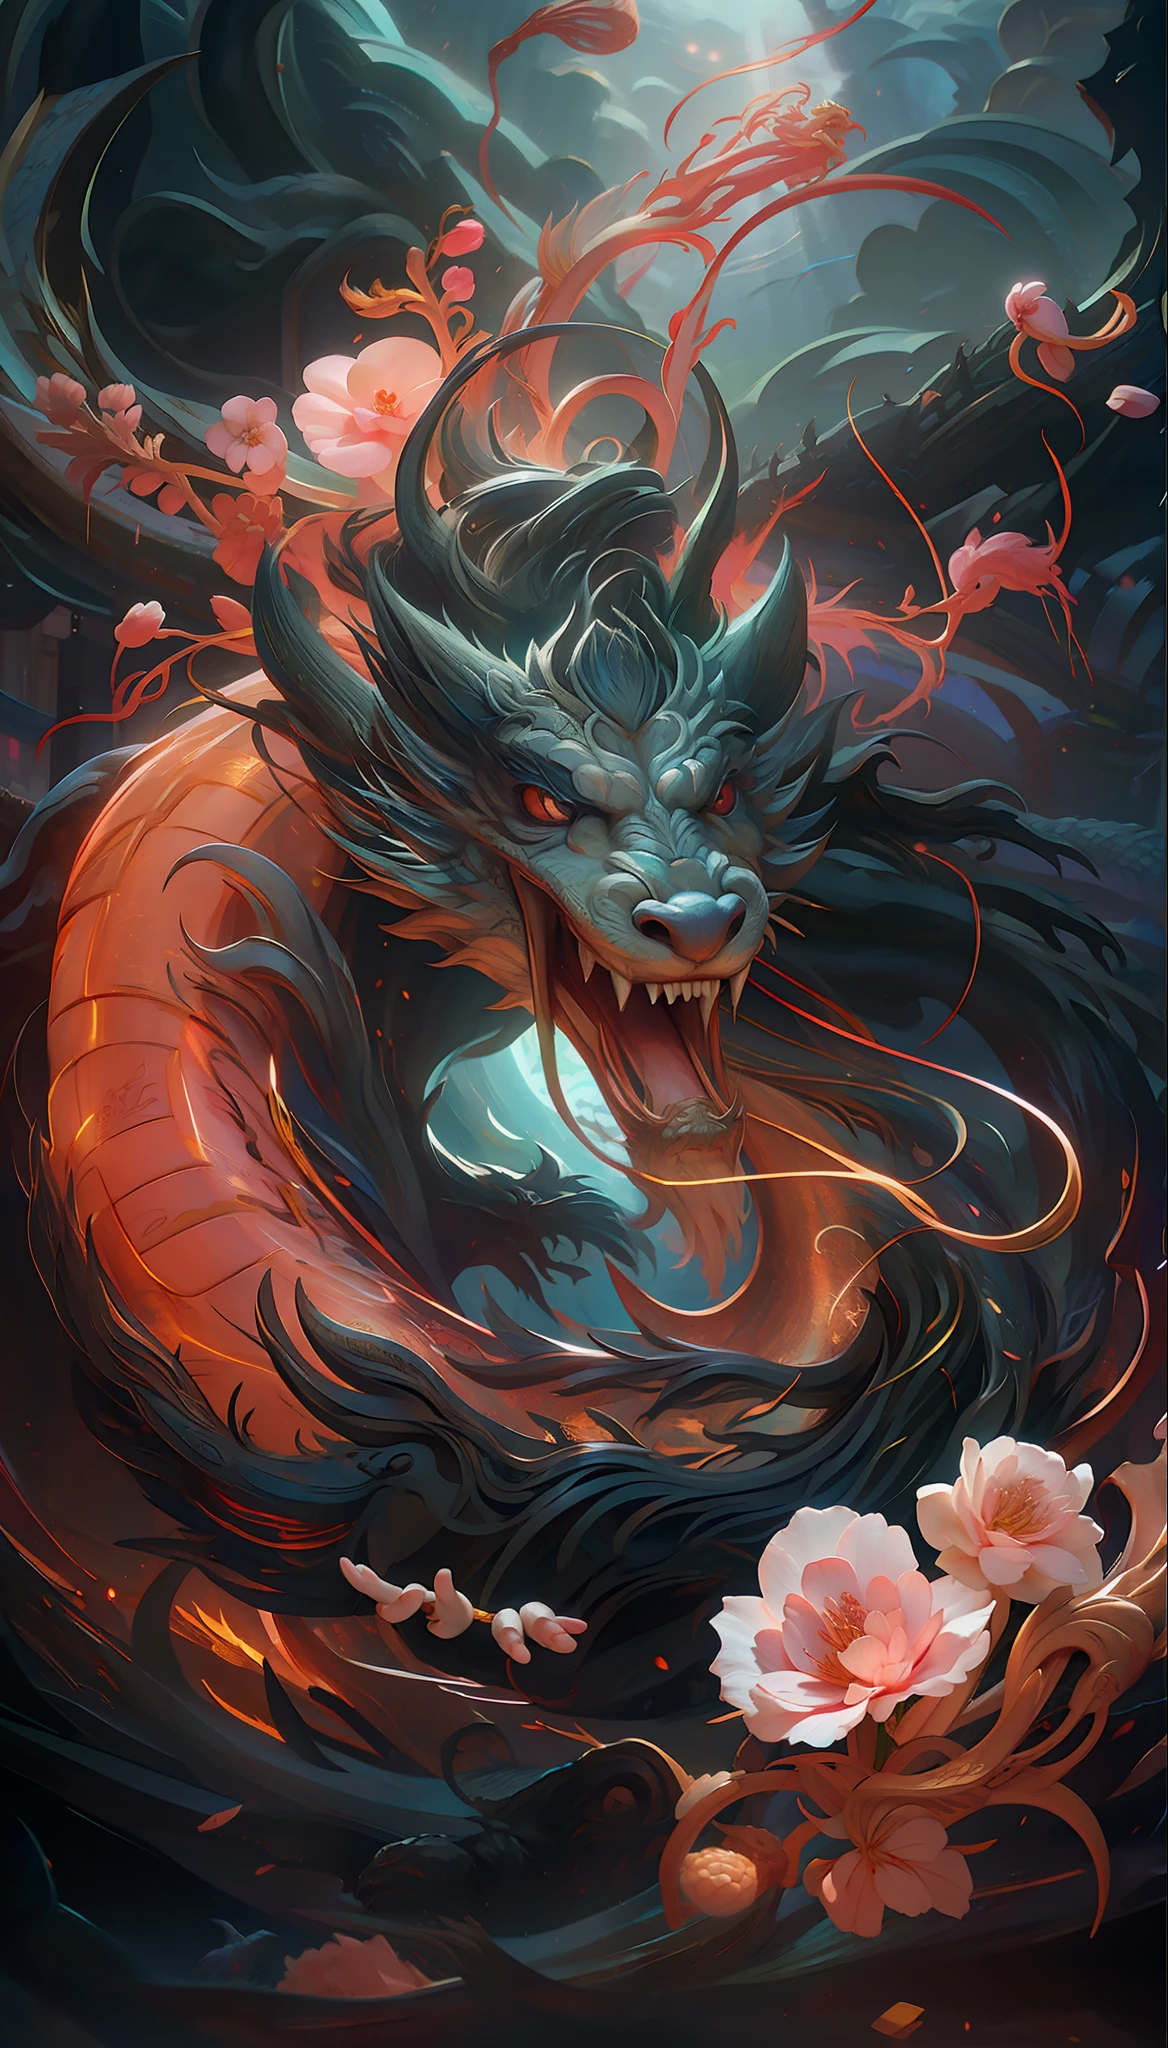 painting of a 龍 with a flower in its mouth, chinese 龍 concept art, cyan chinese 龍 fantasy, 龍 art, majestic japanese 龍, oil painting of 龍, chinese 龍, 和芒福德·湯姆·巴格肖, 一幅美丽的艺术插图, 龍 portrait, 作者：亞瑟潘, 譚魯本, 龍, smooth chinese 龍, fire flaming 龍 serpent, 作者：Yang J